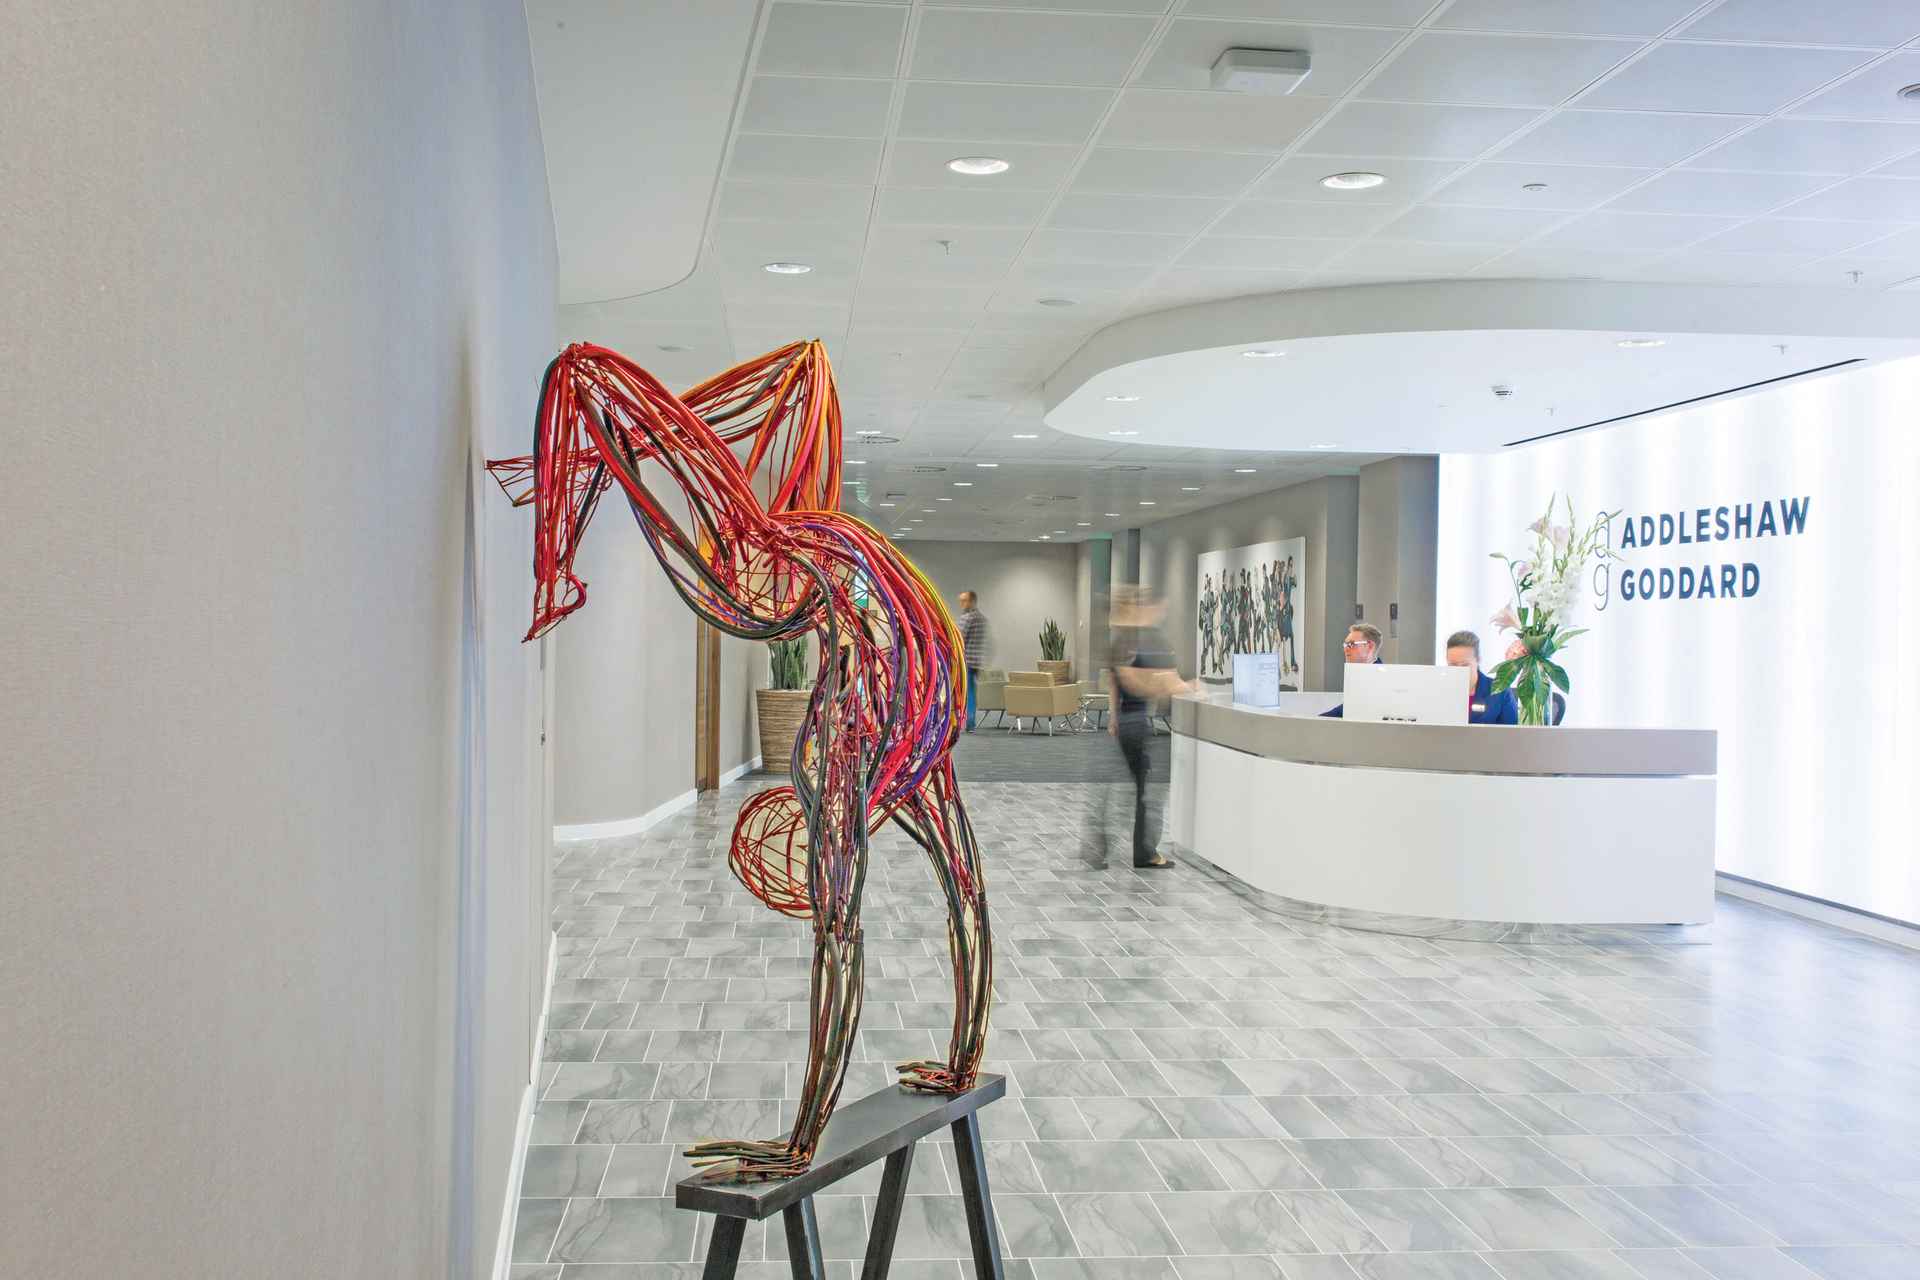 Bringing colour & energy into the working environment by Addleshaw Goddard